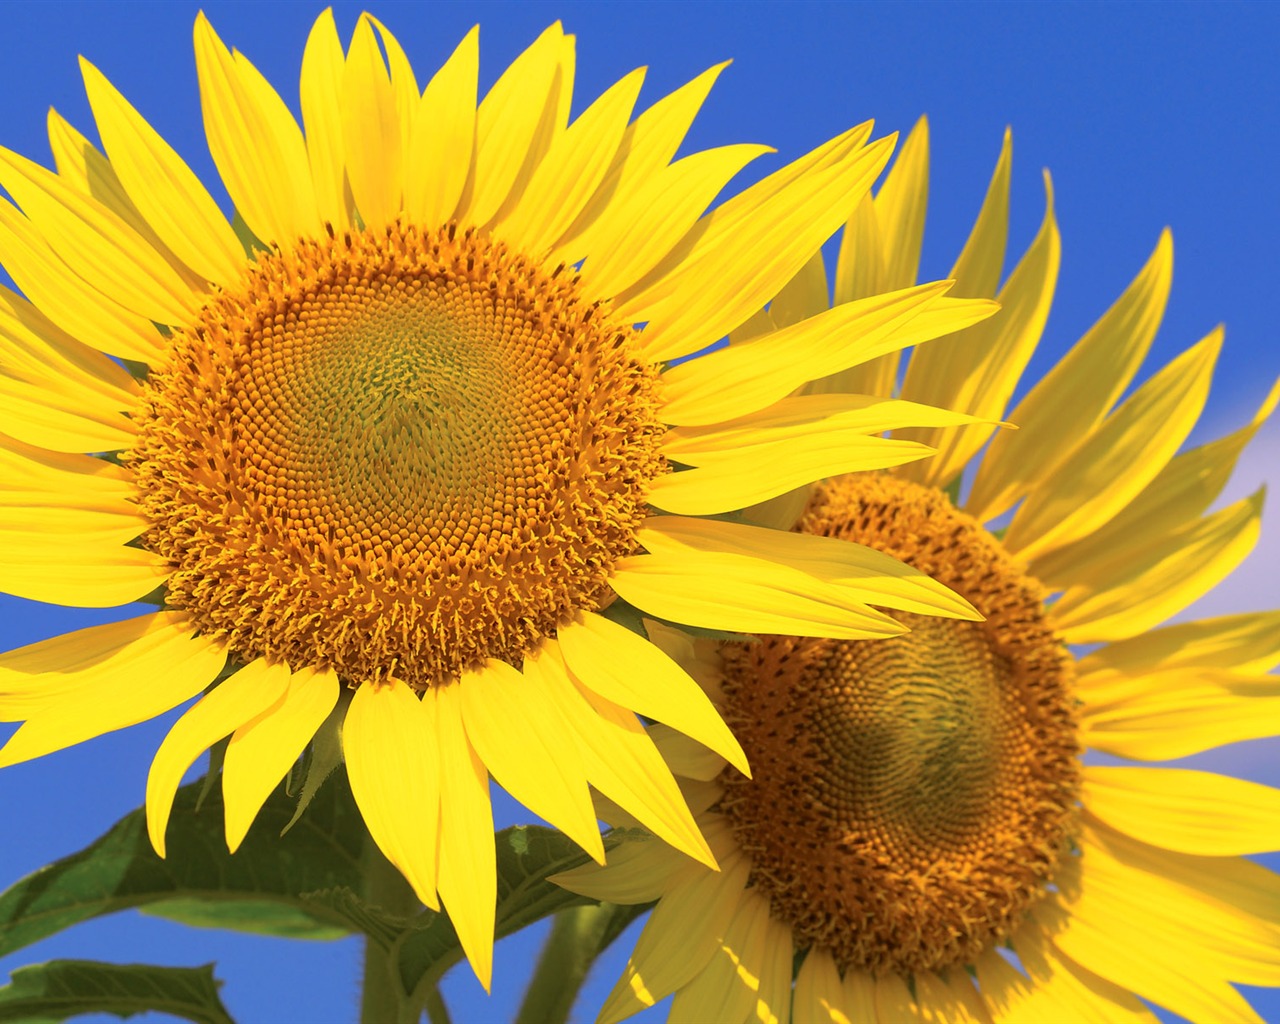 Sunny sunflower photo HD Wallpapers #25 - 1280x1024